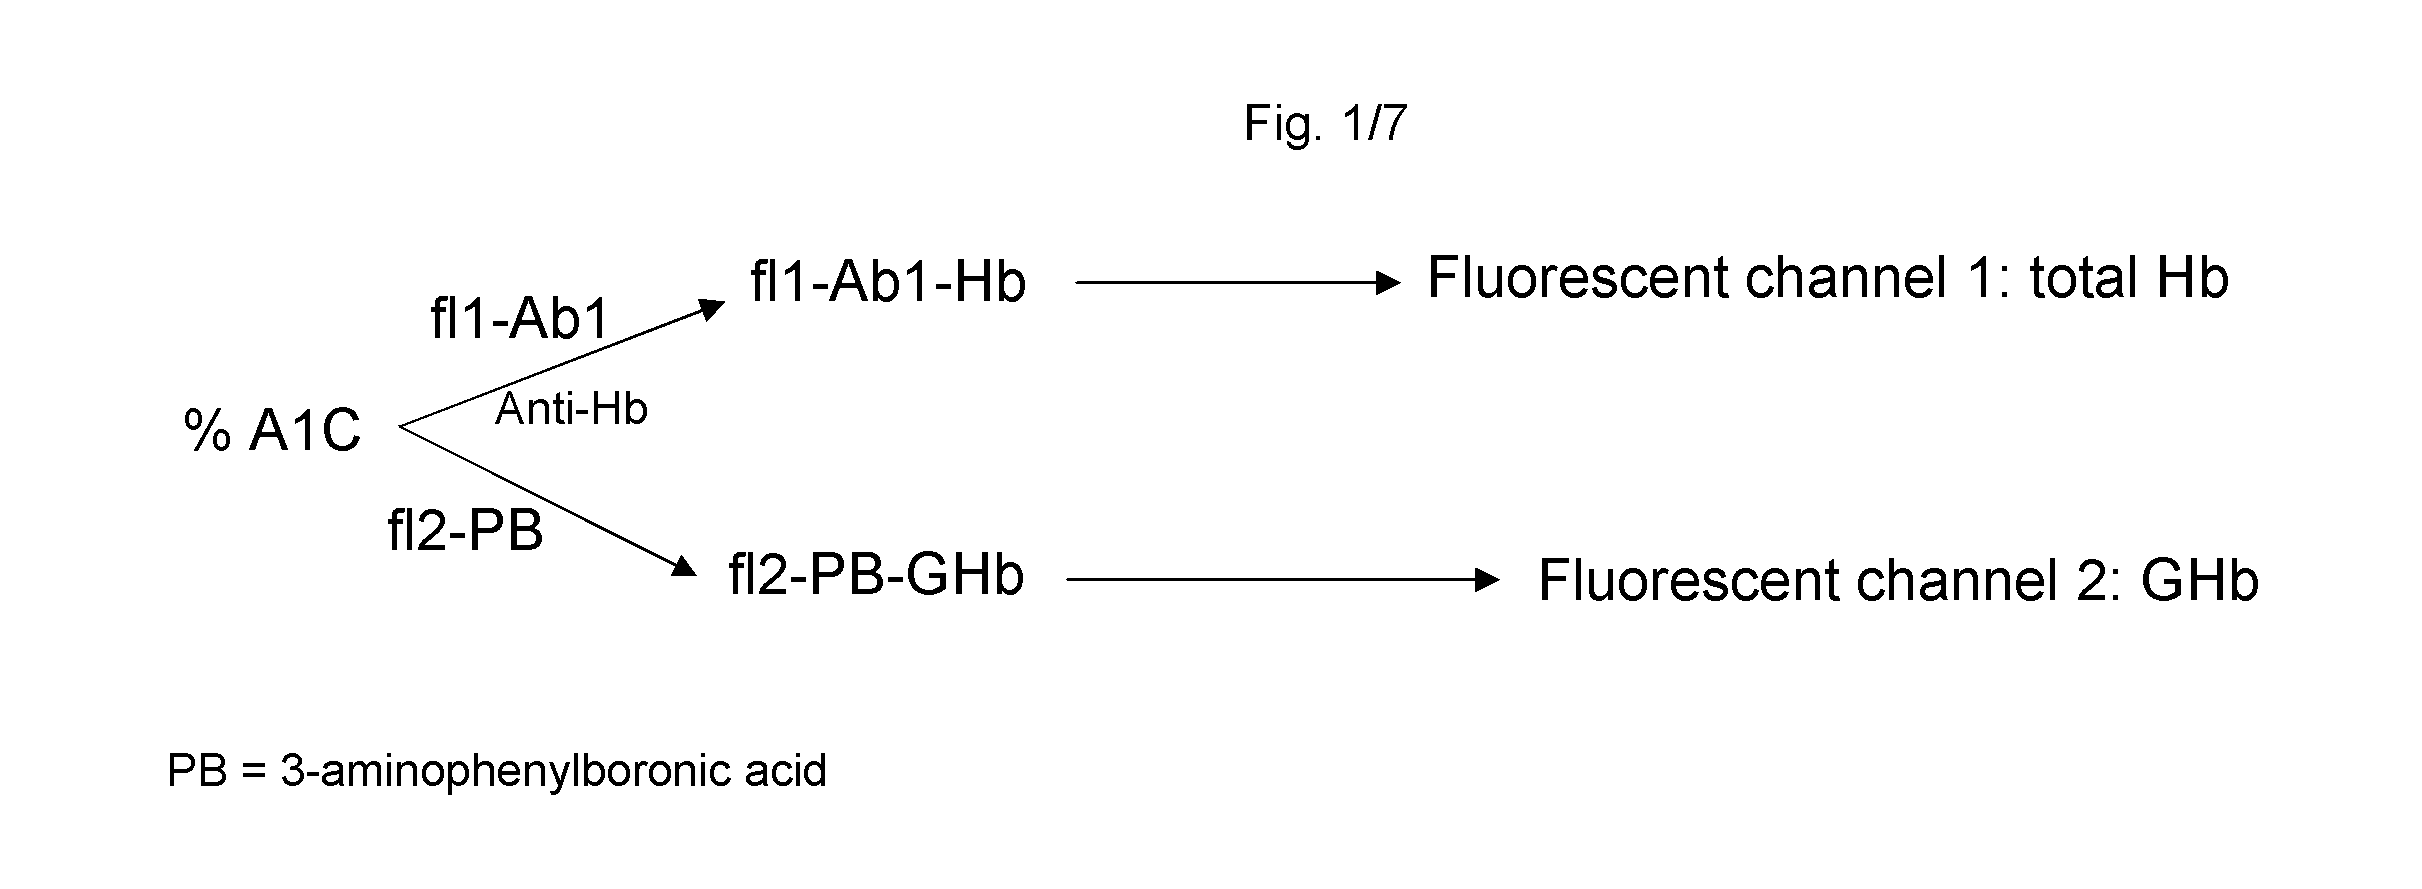 Systems and methods for determining the percentage of glycated hemoglobin